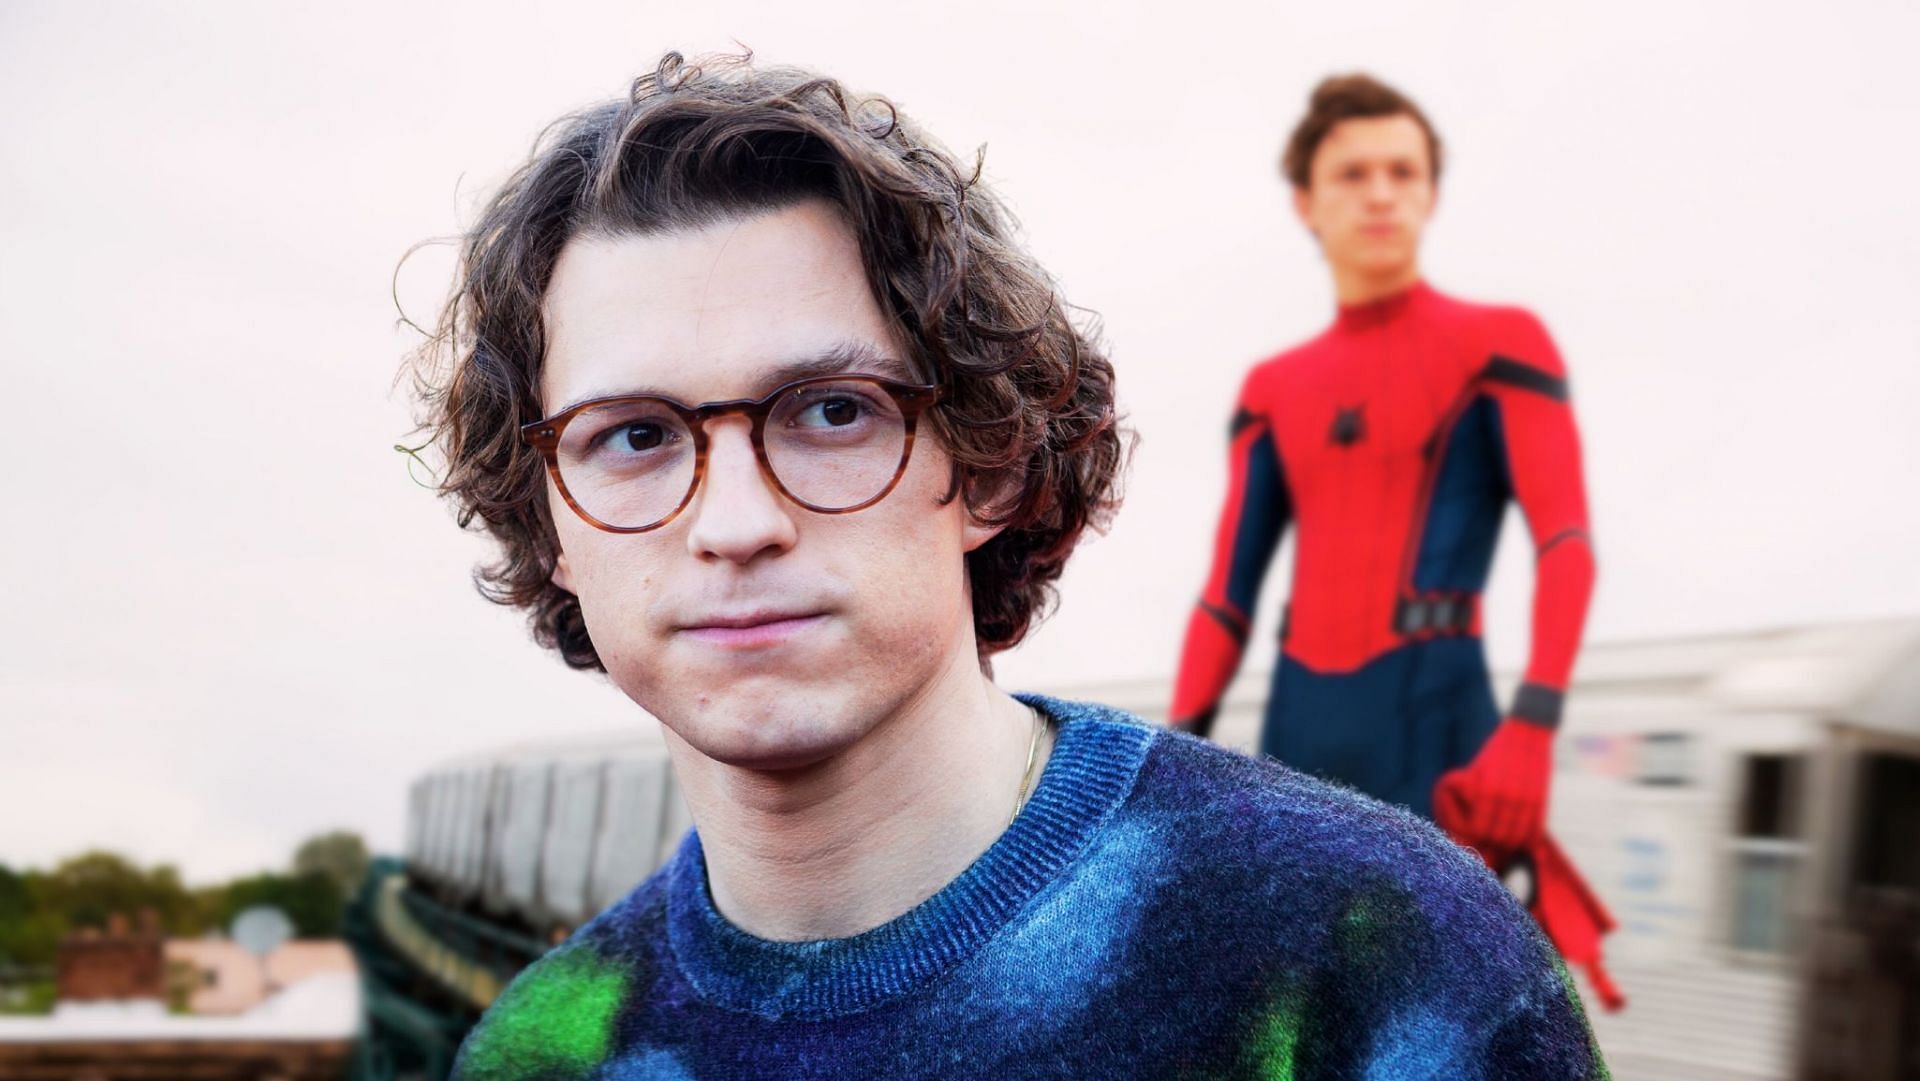 Tom Holland: A Pause in a Streak of Blockbusters - The actor enjoys a quiet moment amidst his recent success (Image via Sportskeeda)